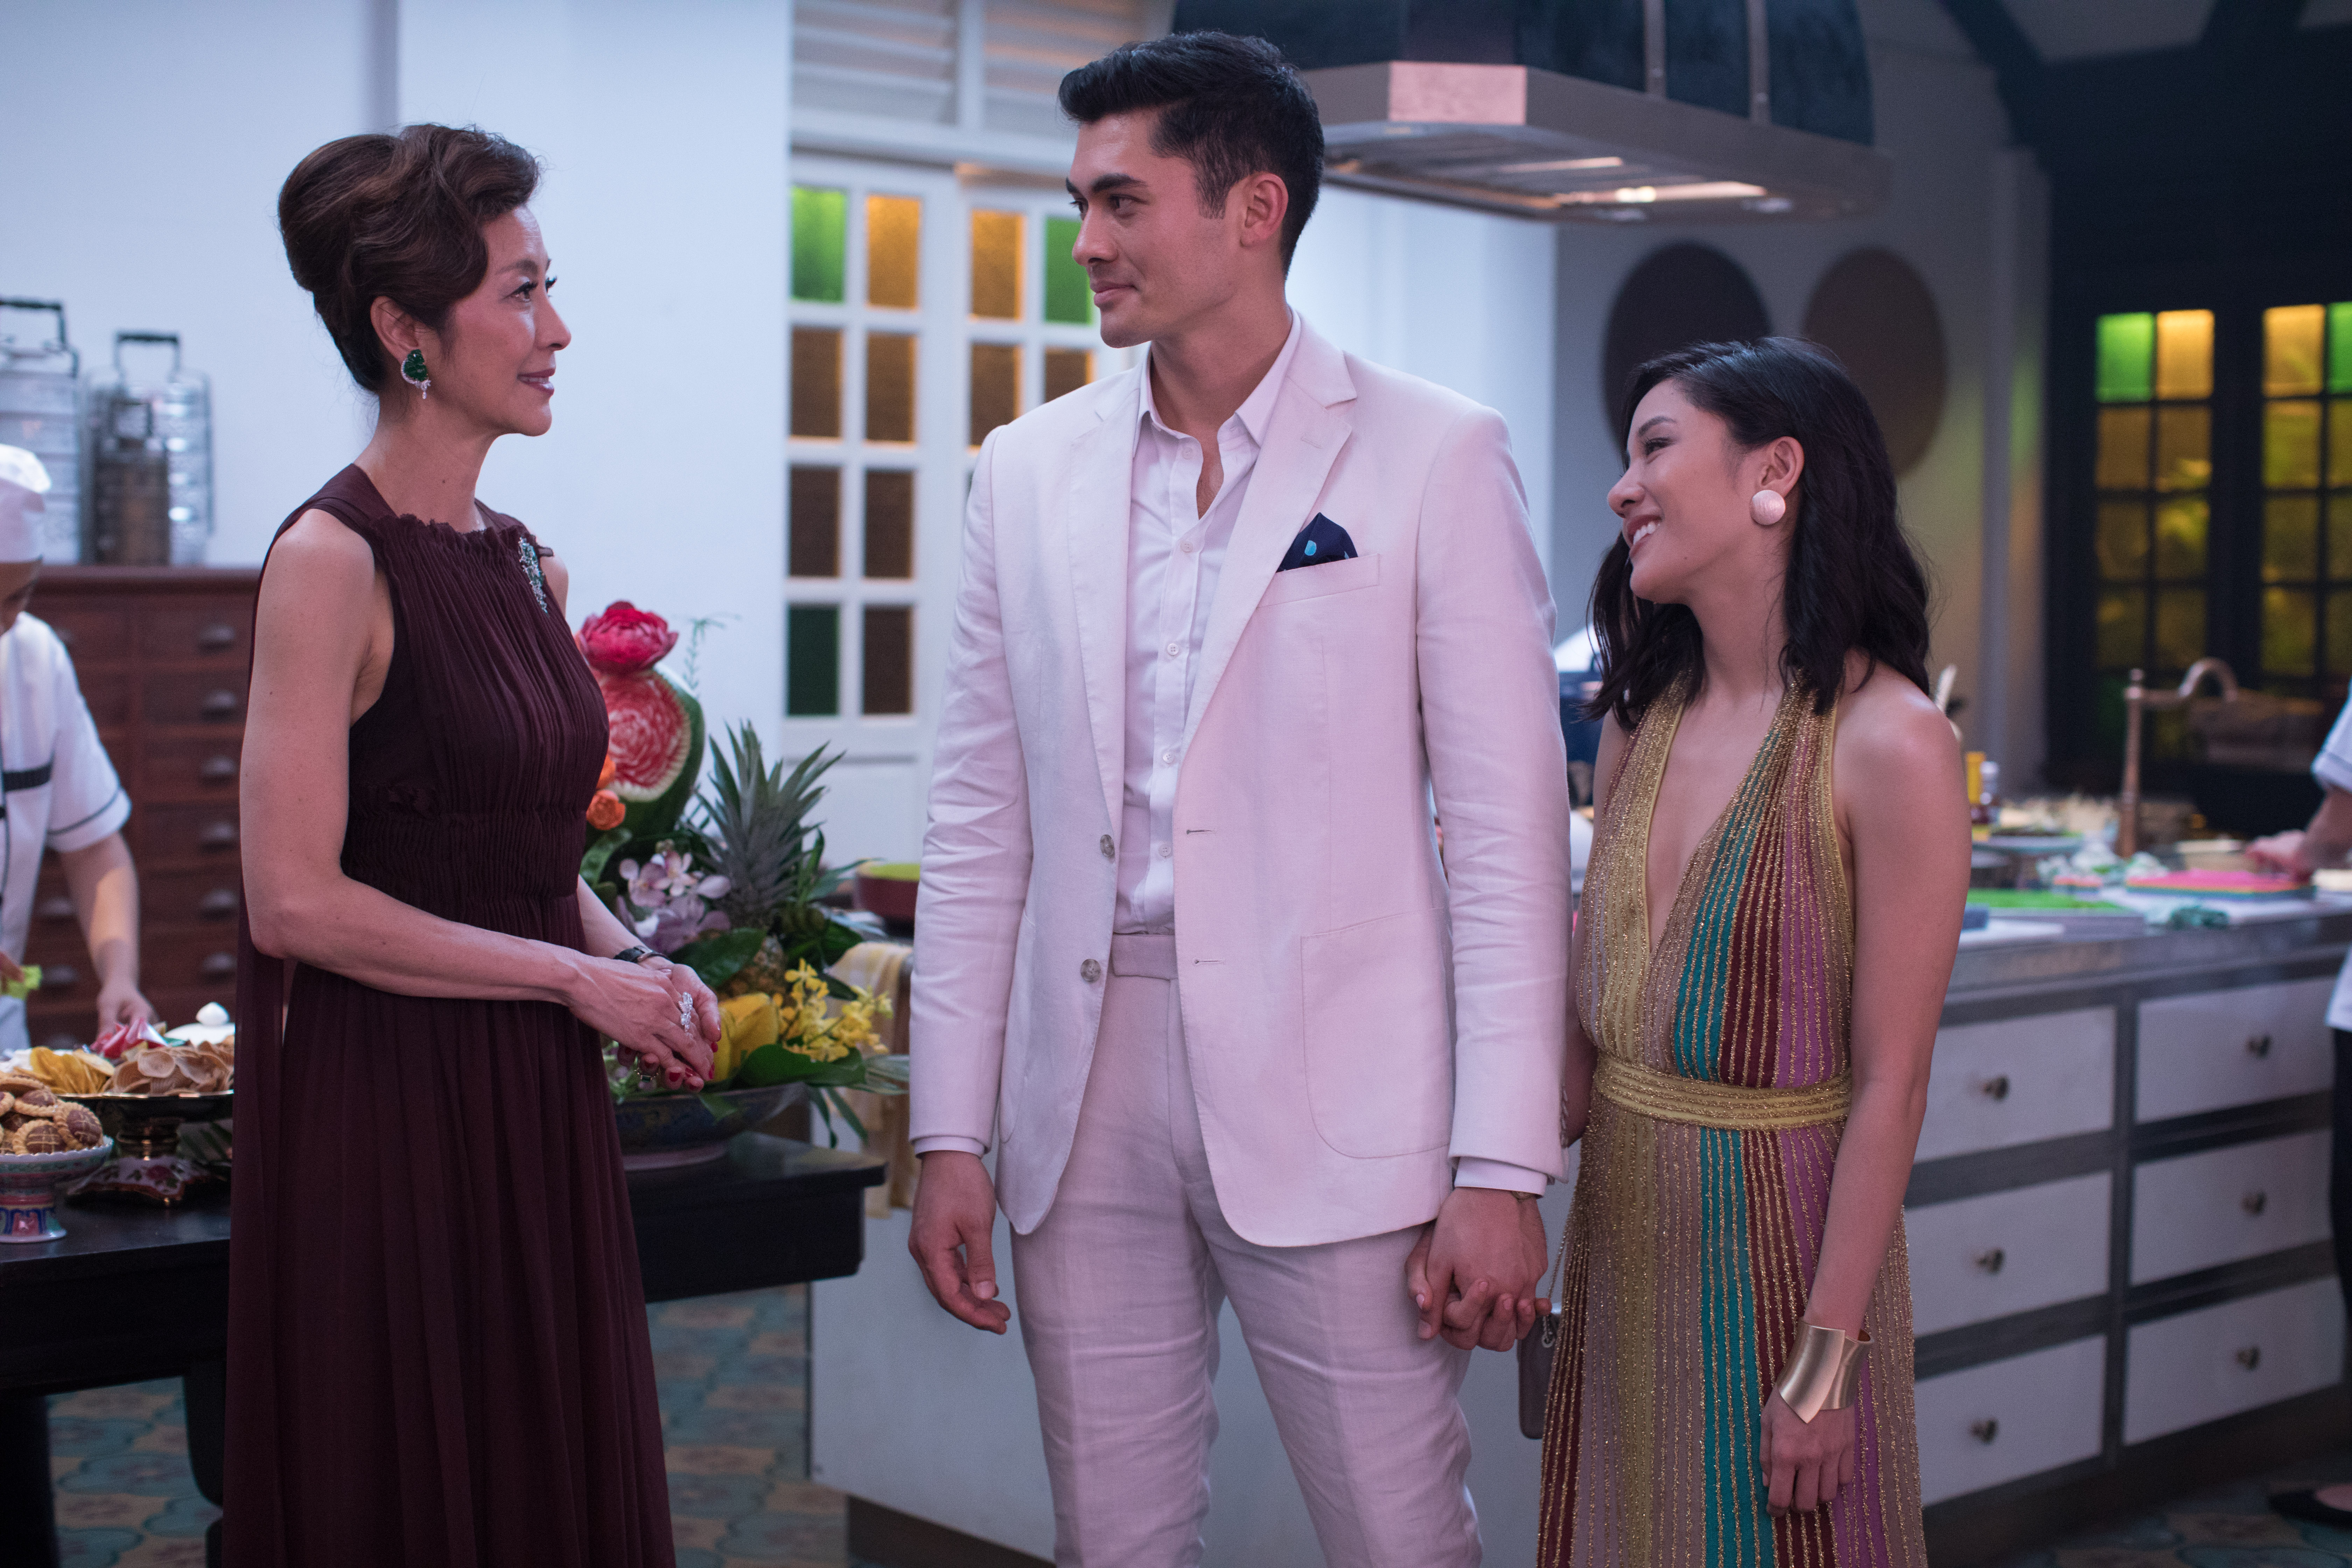 (L-R) MICHELLE YEOH as Eleanor, HENRY GOLDING as Nick and CONSTANCE WU as Rachel in Warner Bros. Pictures' and SK Global Entertainment's contemporary romantic comedy "CRAZY RICH ASIANS," a Warner Bros. Pictures release. Photo Credit: Sanja Bucko